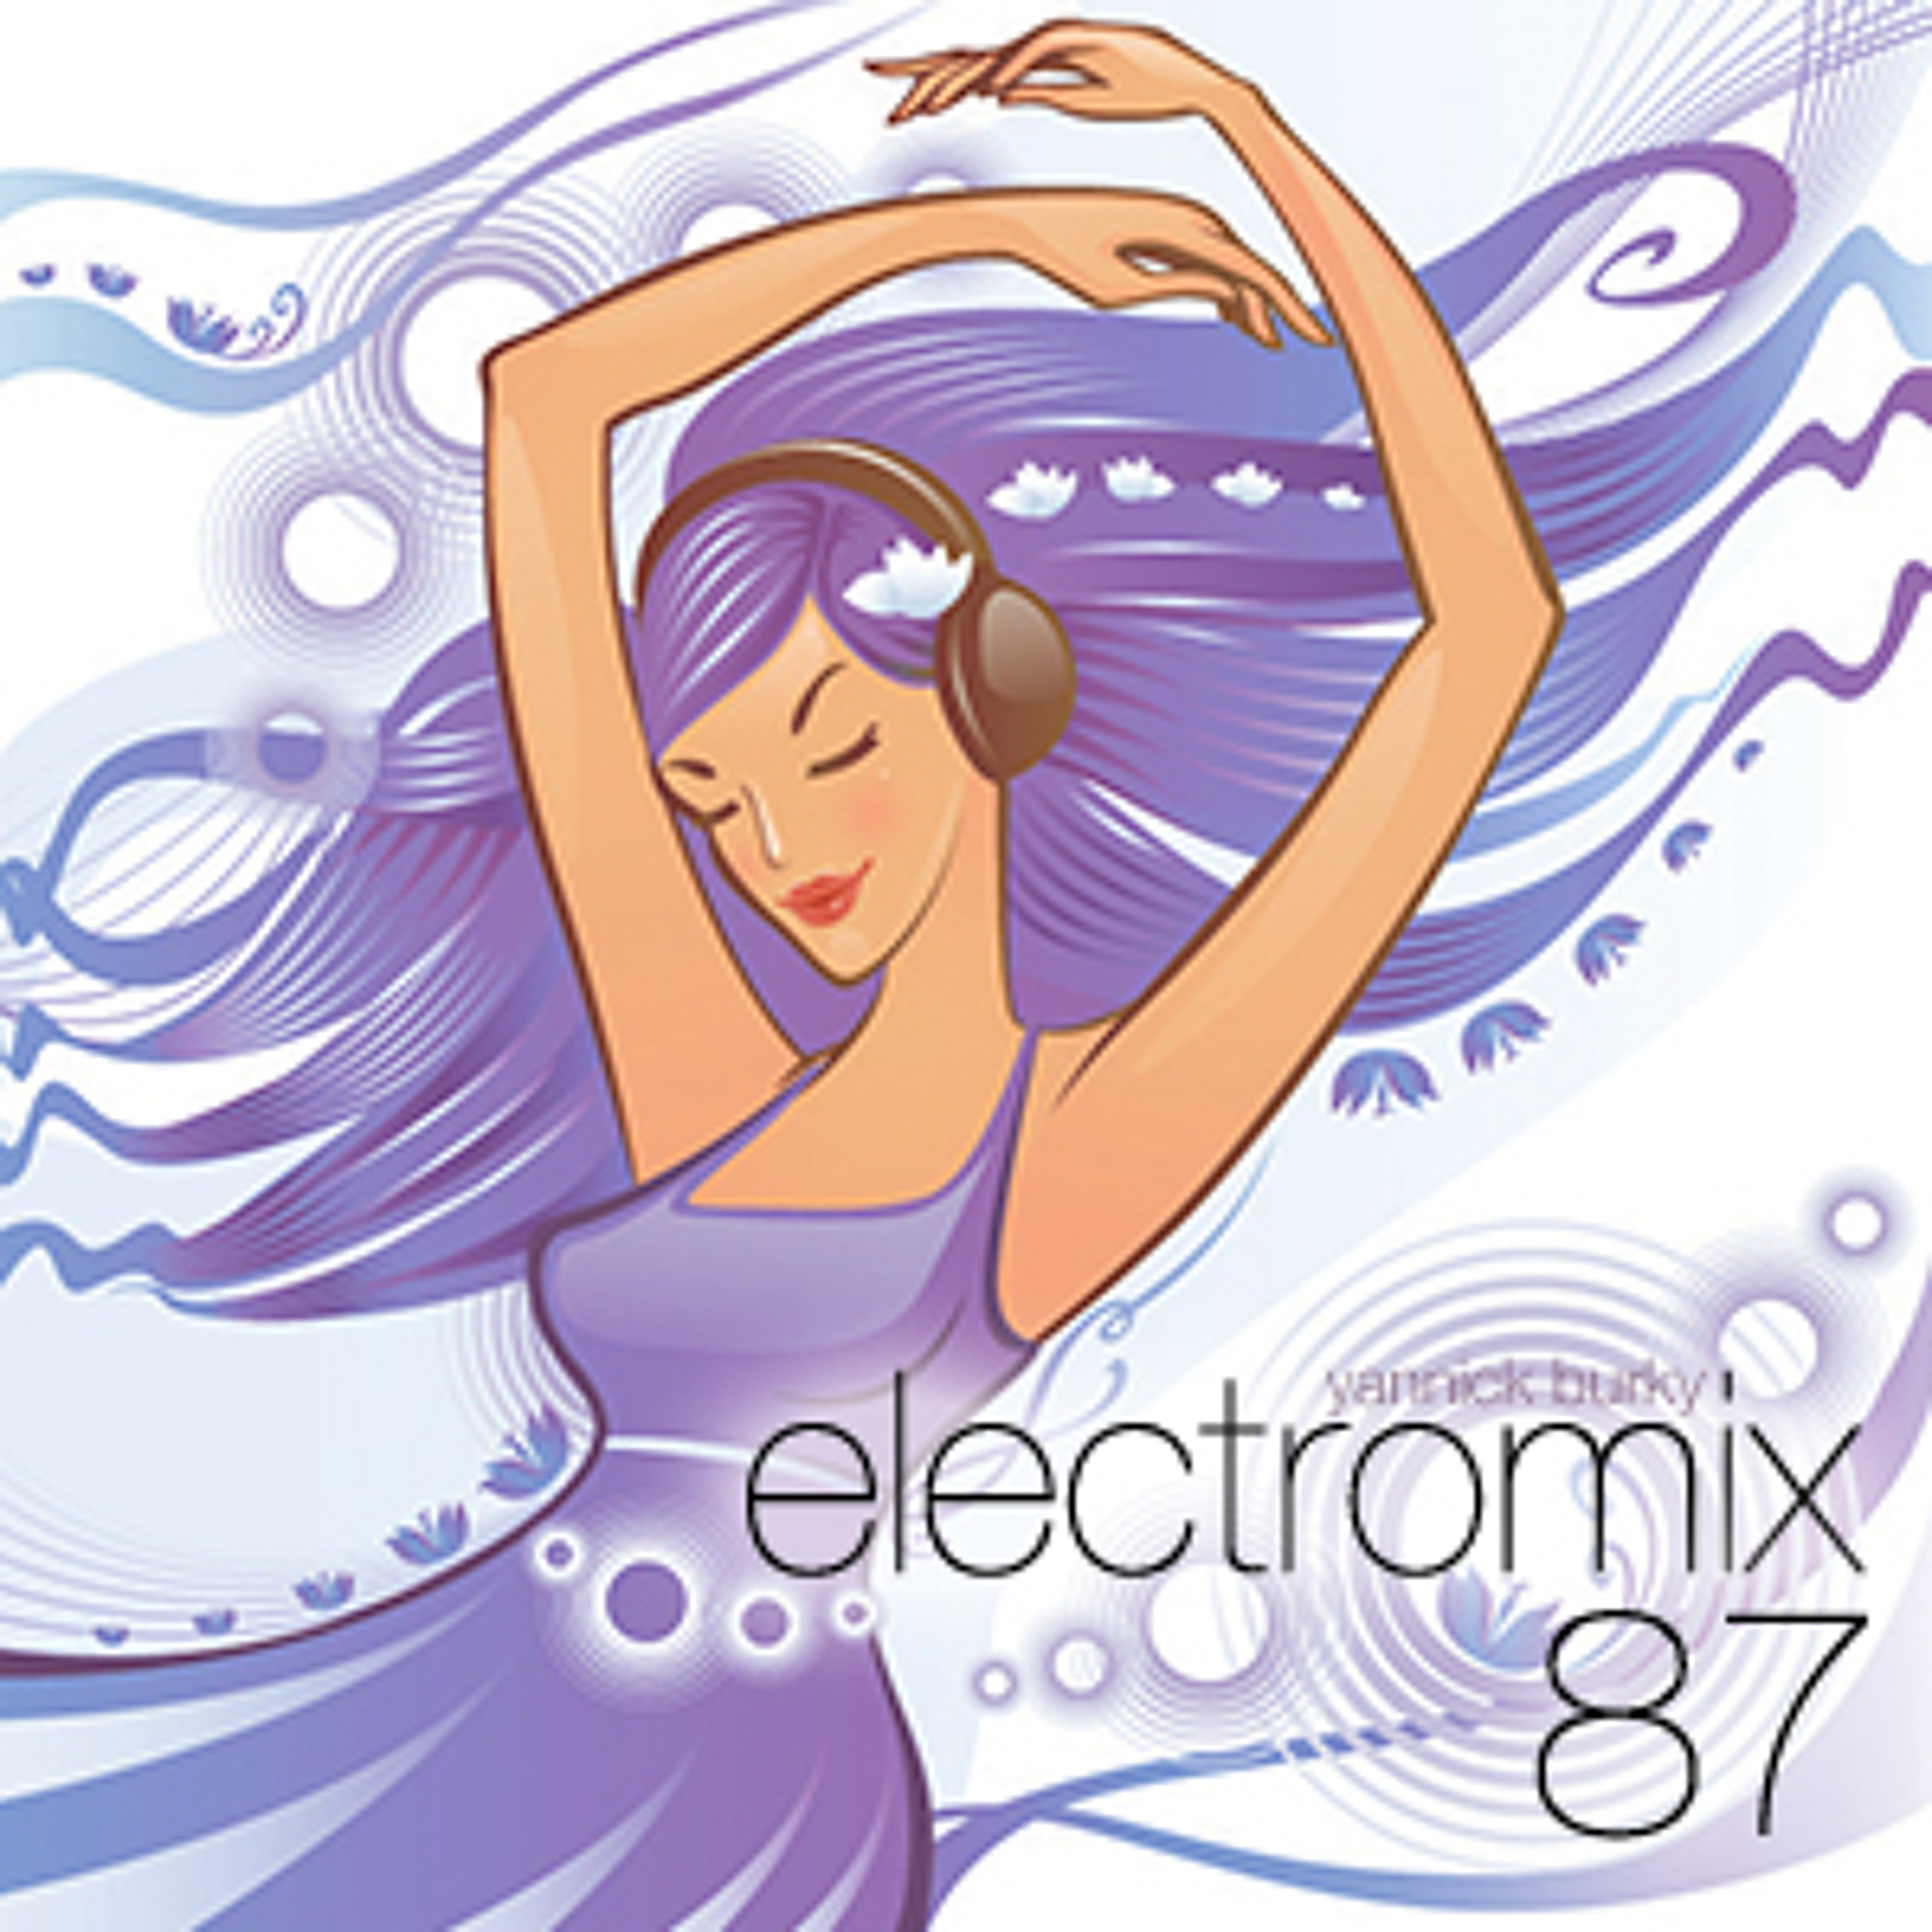 electromix 87 • House Music